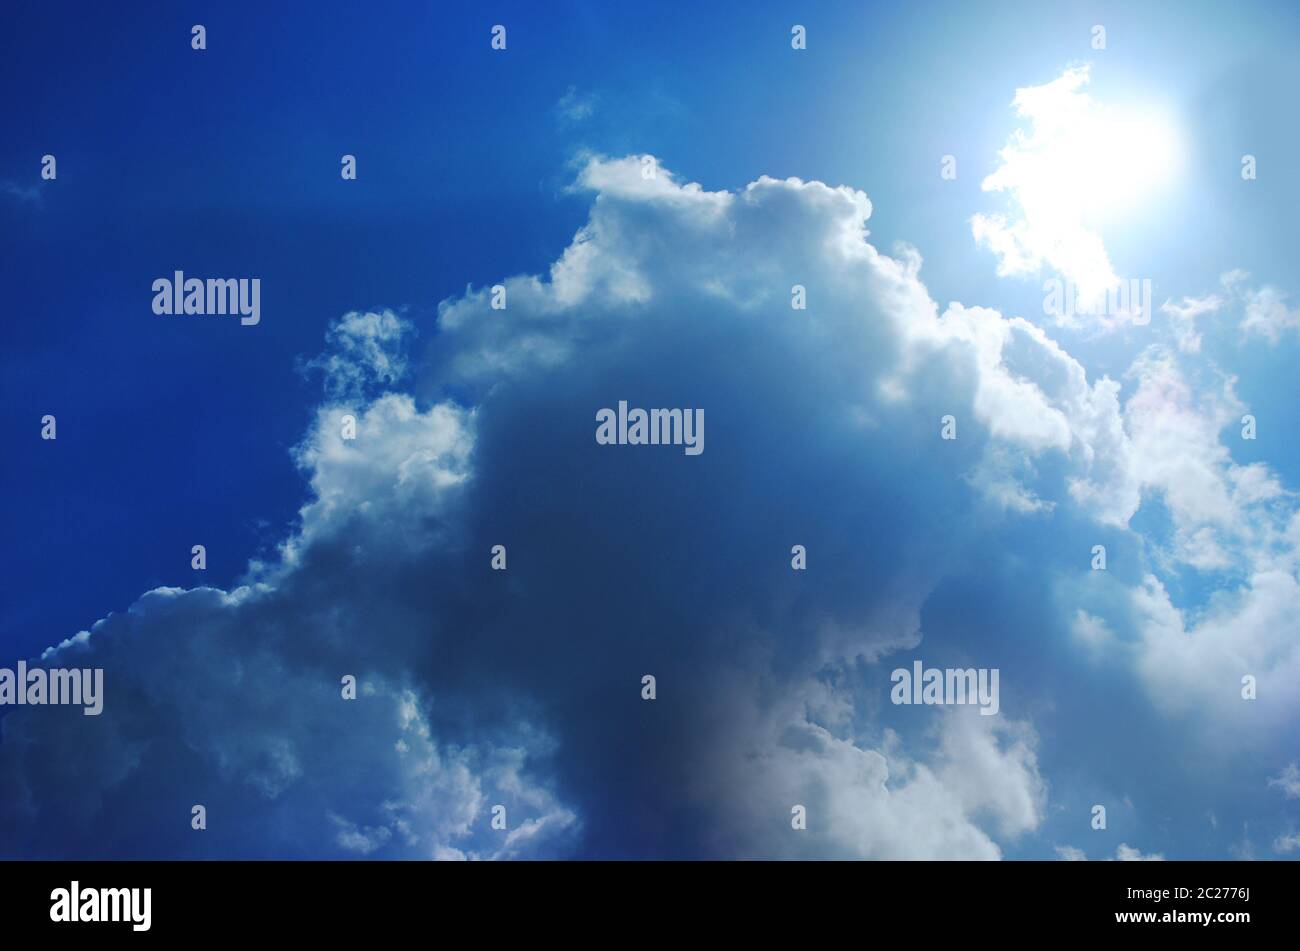 Small bright cloud at the dark cloudy sky Stock Photo